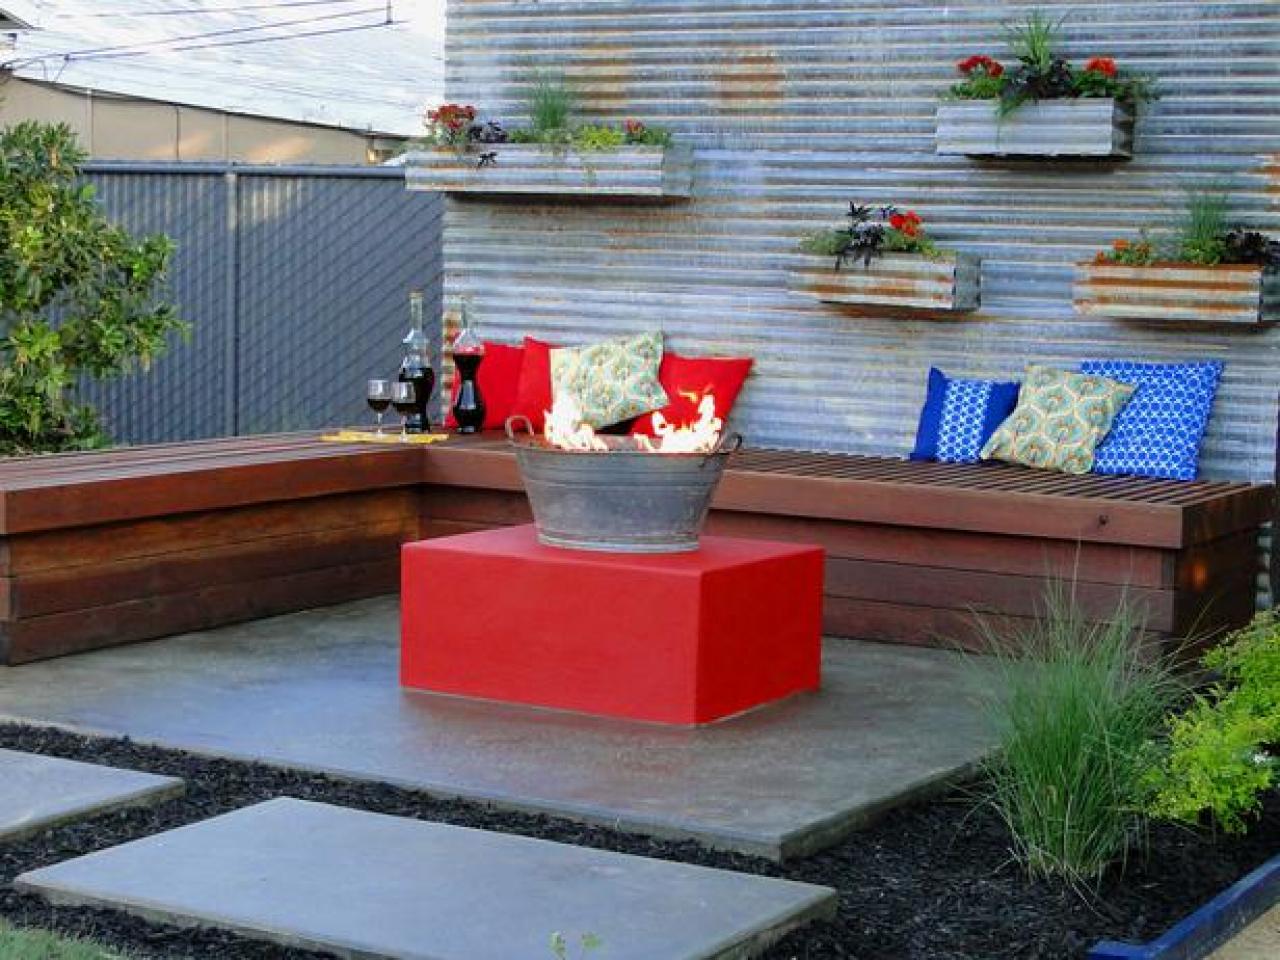 Fire Pit Ideas, Can You Have A Small Fire Pit In Your Backyard